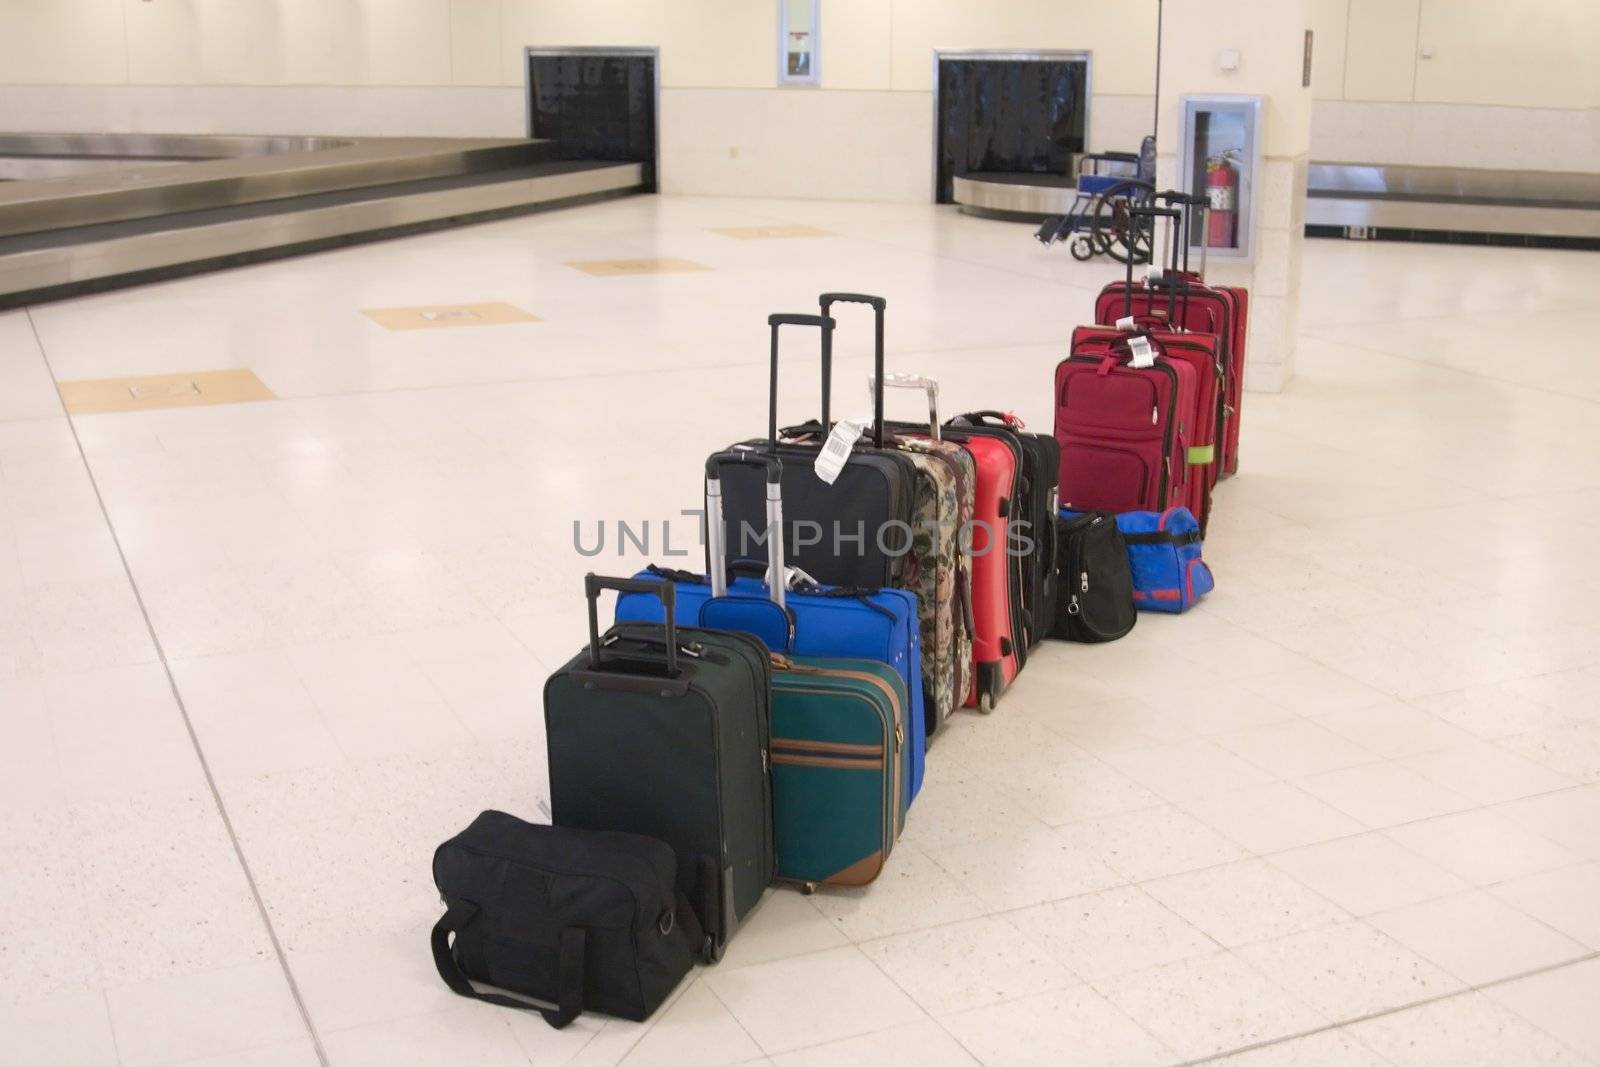 Passenger baggage and luggage in the baggage claim area of the airport